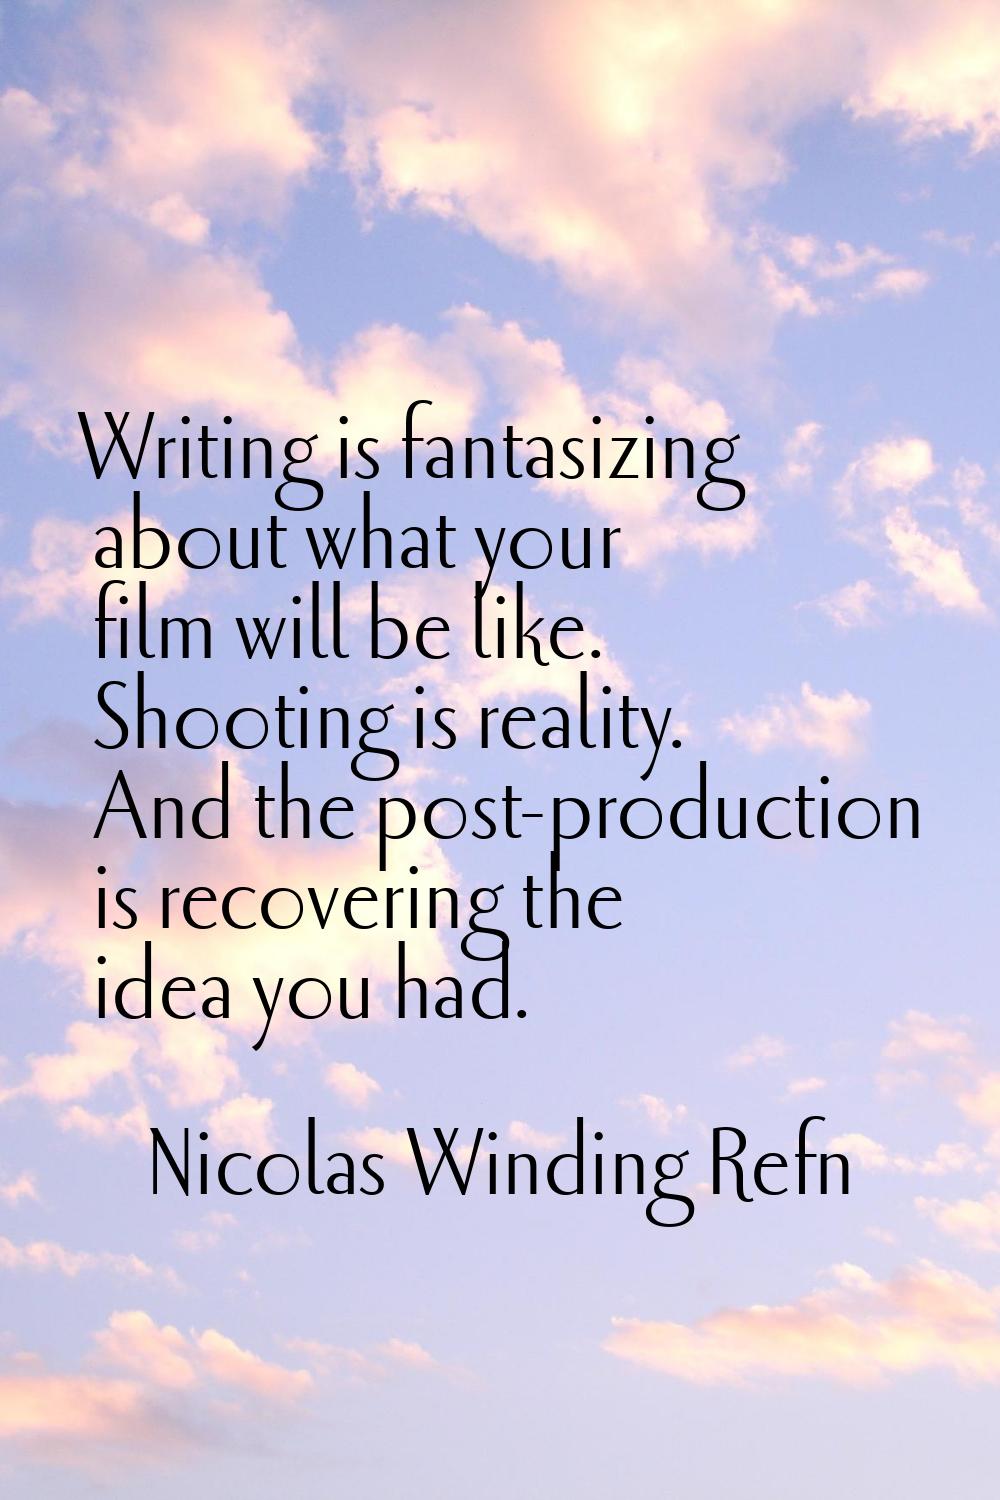 Writing is fantasizing about what your film will be like. Shooting is reality. And the post-product